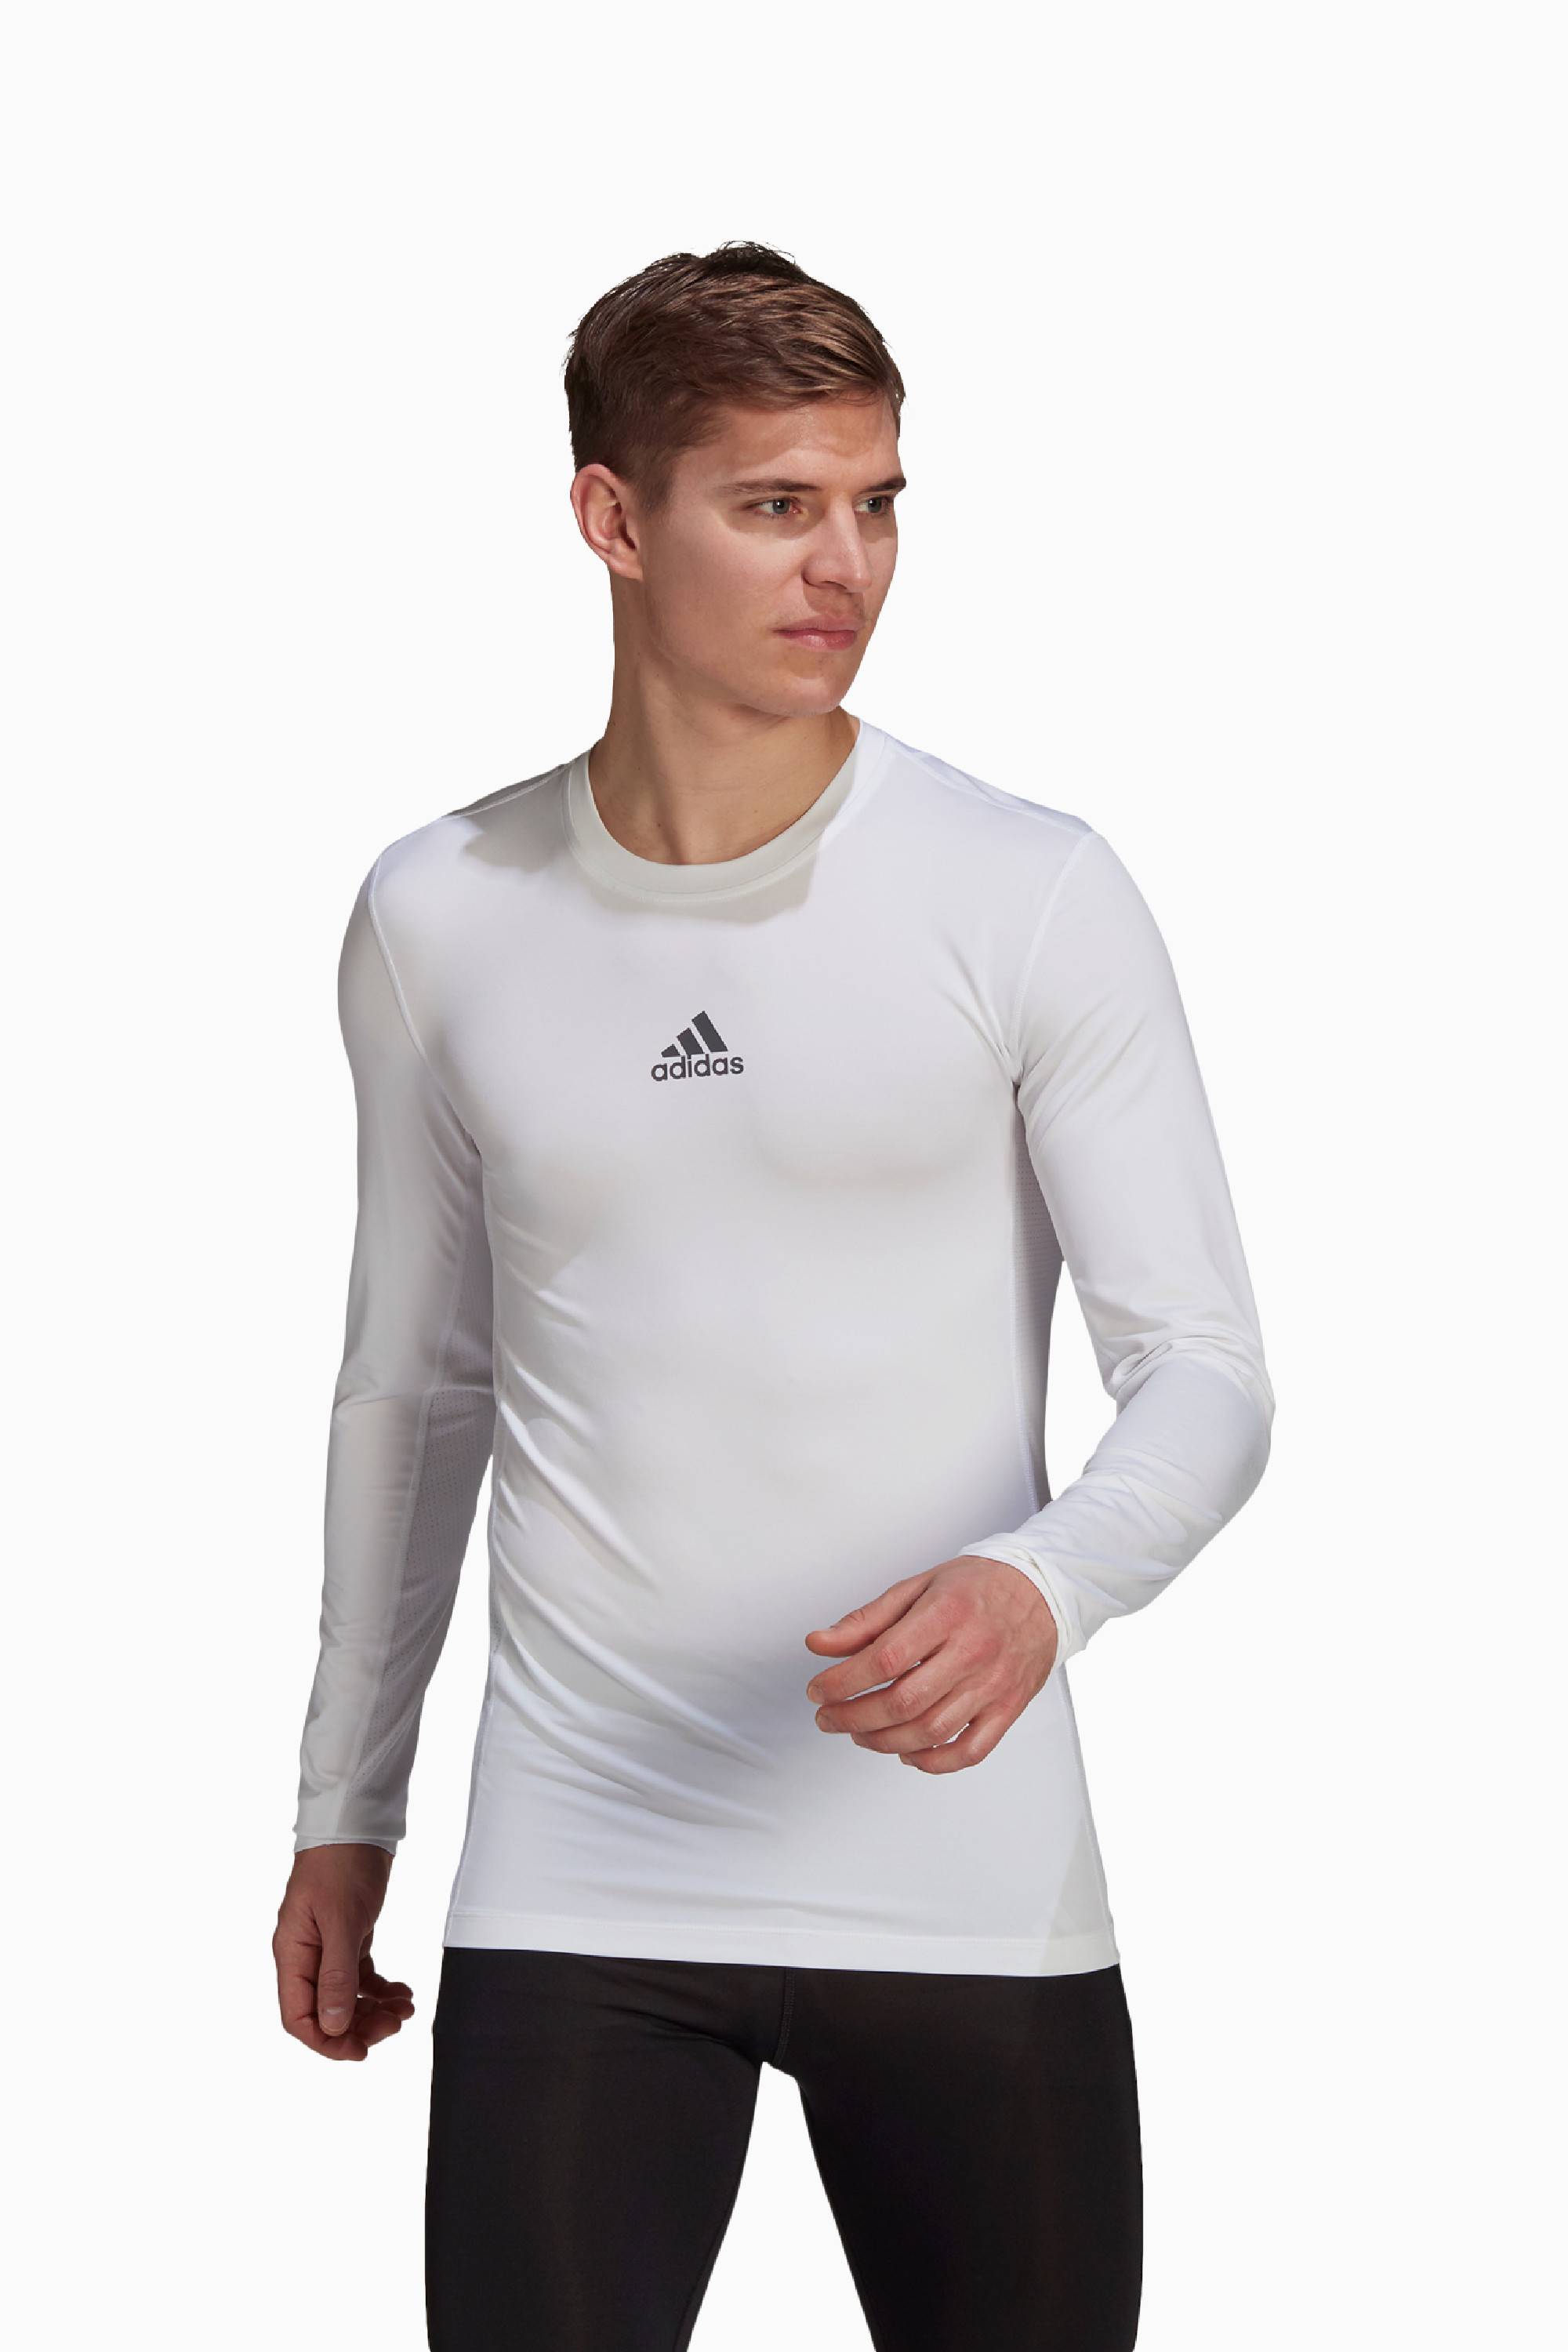 Shop Adidas Techfit Compression with great discounts and prices